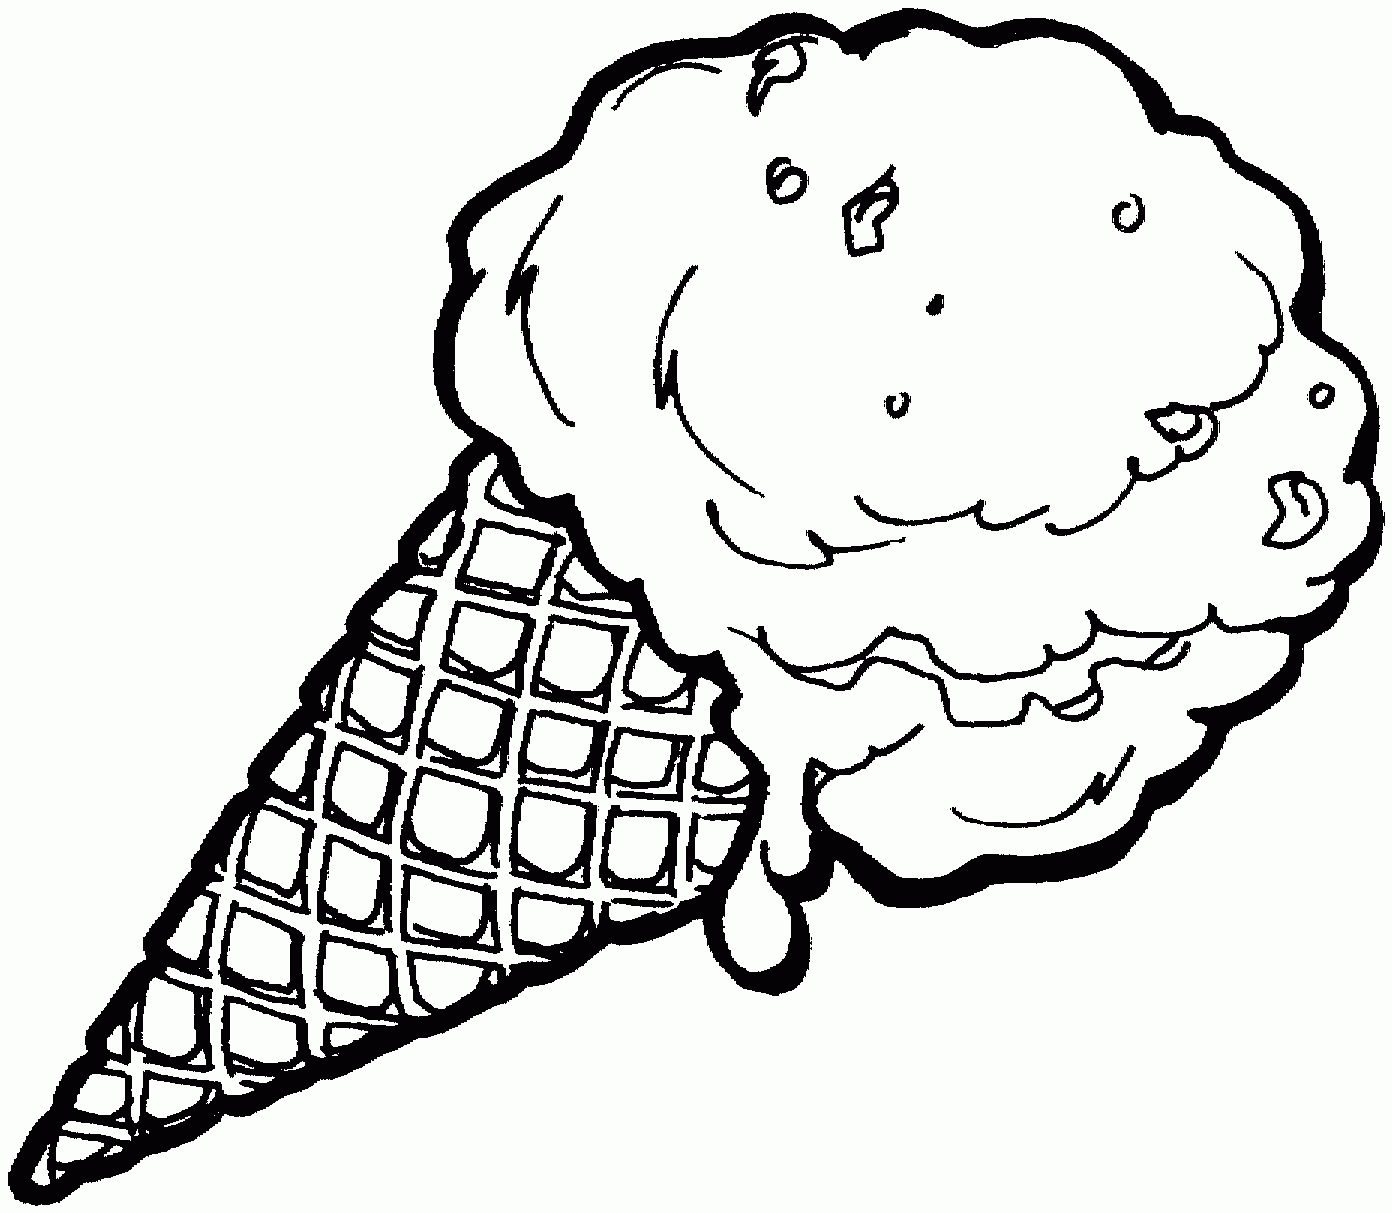 Free Ice Cream Cone Coloring Page, Download Free Clip Art, Free Clip - Ice Cream Color Pages Printable Free